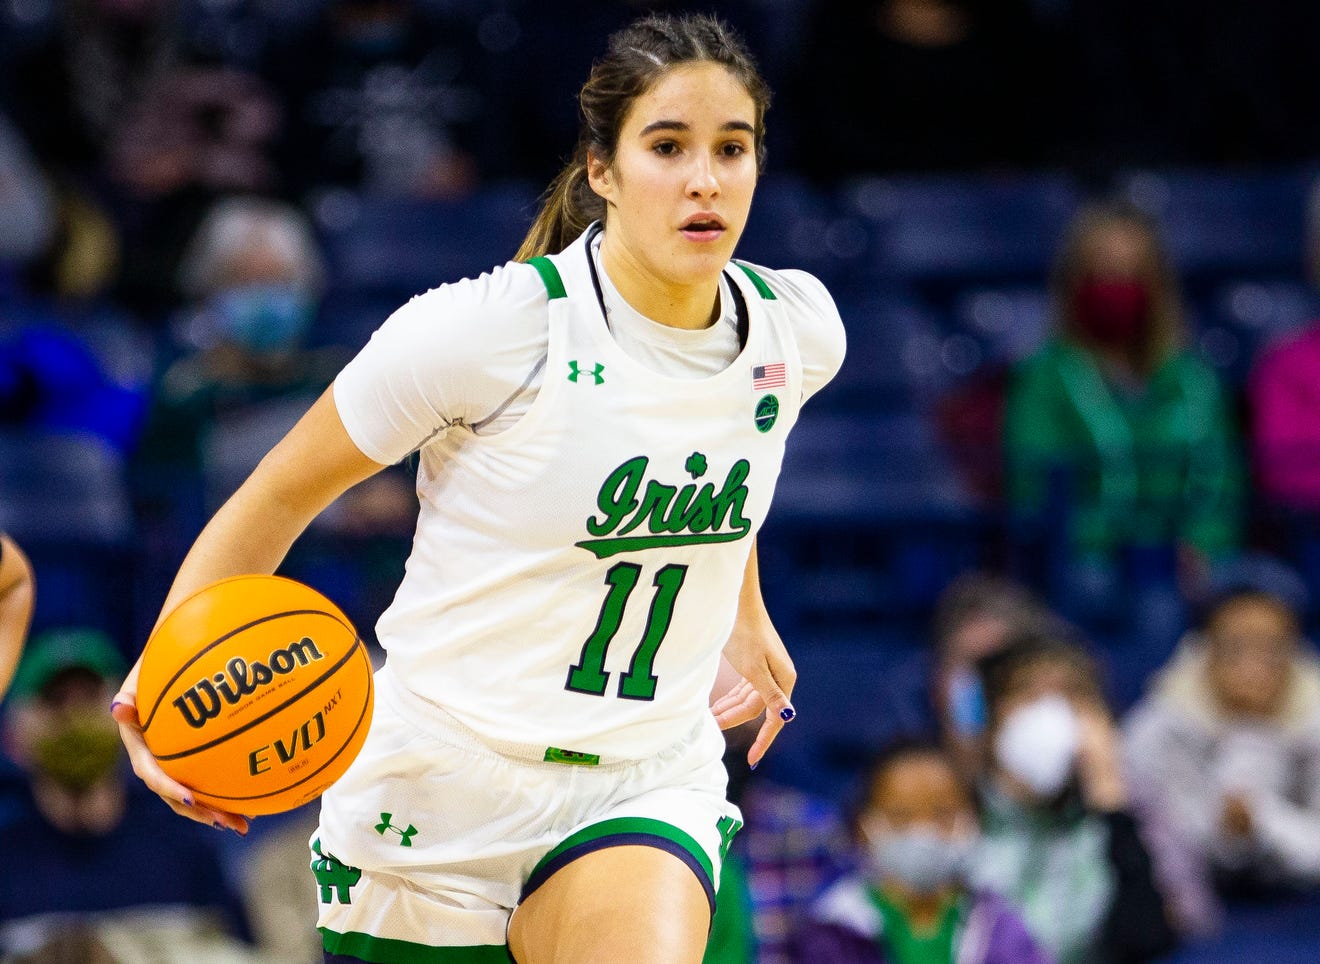 Notre Dame women's basketball will make short trip to play winless